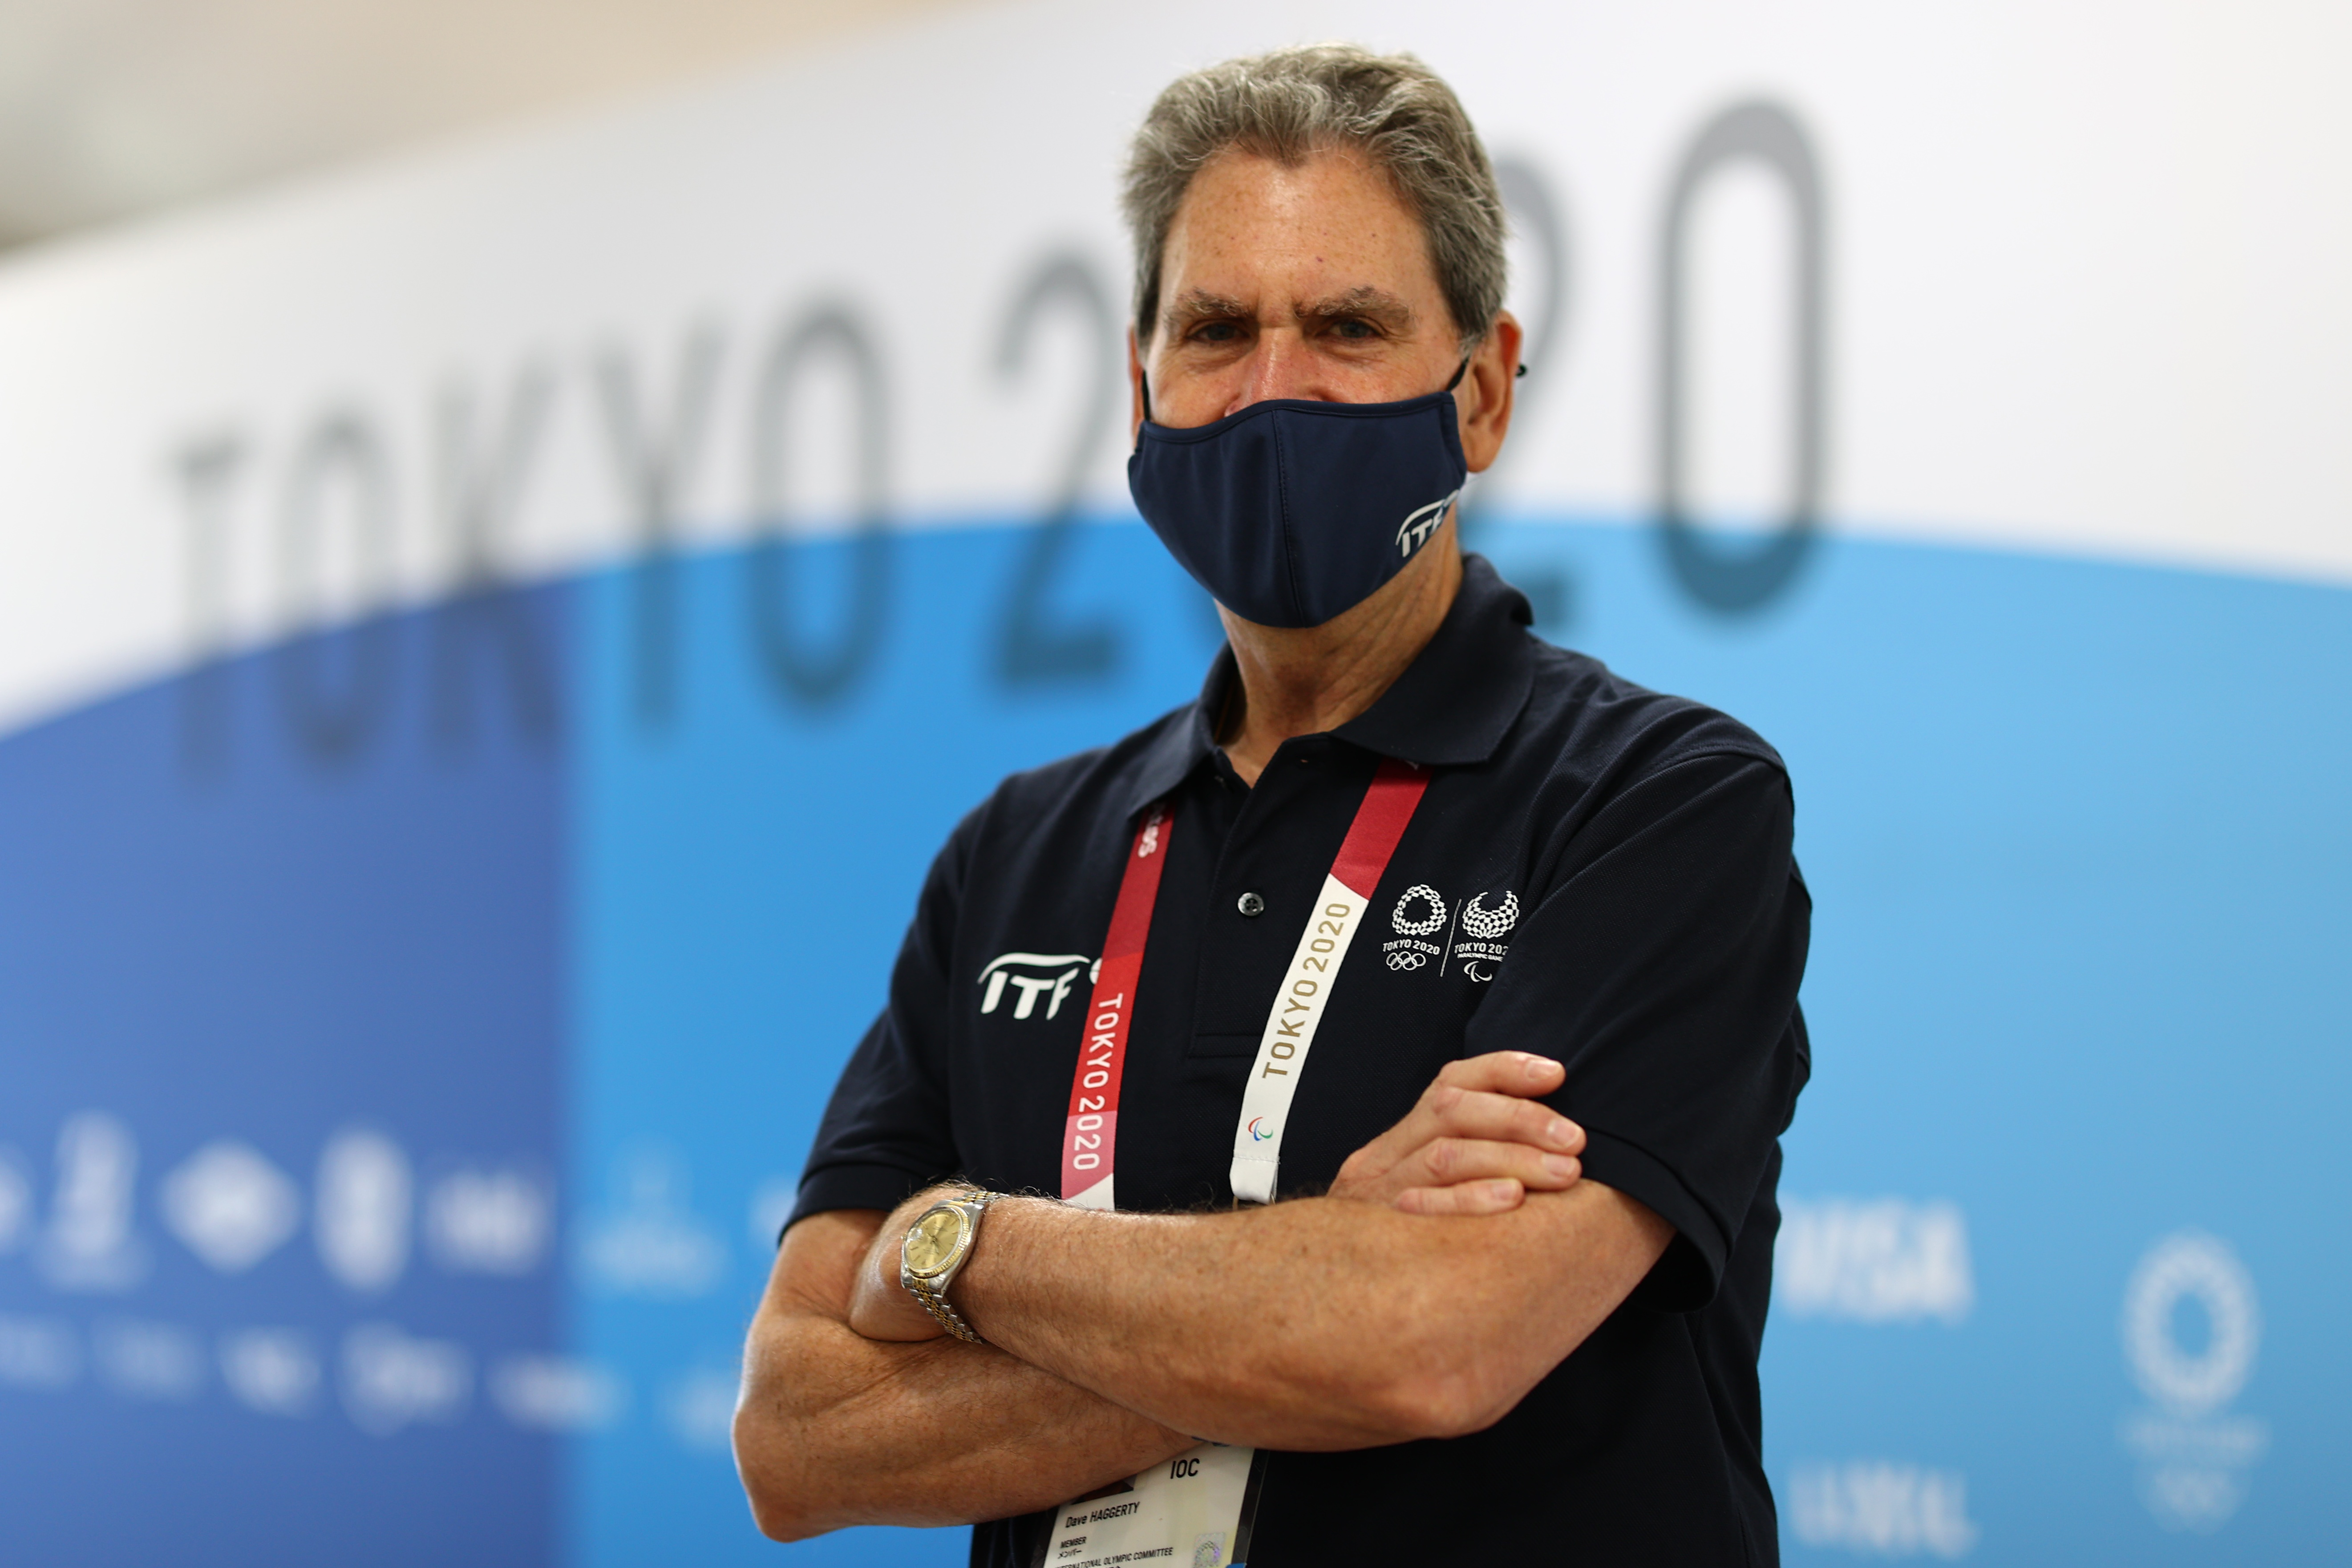 Tokyo 2020 Olympics - Tennis - Women's Singles - Round 1 - Ariake Tennis Park - Tokyo, Japan - July 24, 2021. XXX in action. International Tennis Federation (ITF) president David Haggerty wearing a mask poses for a picture REUTERS/Mike Segar